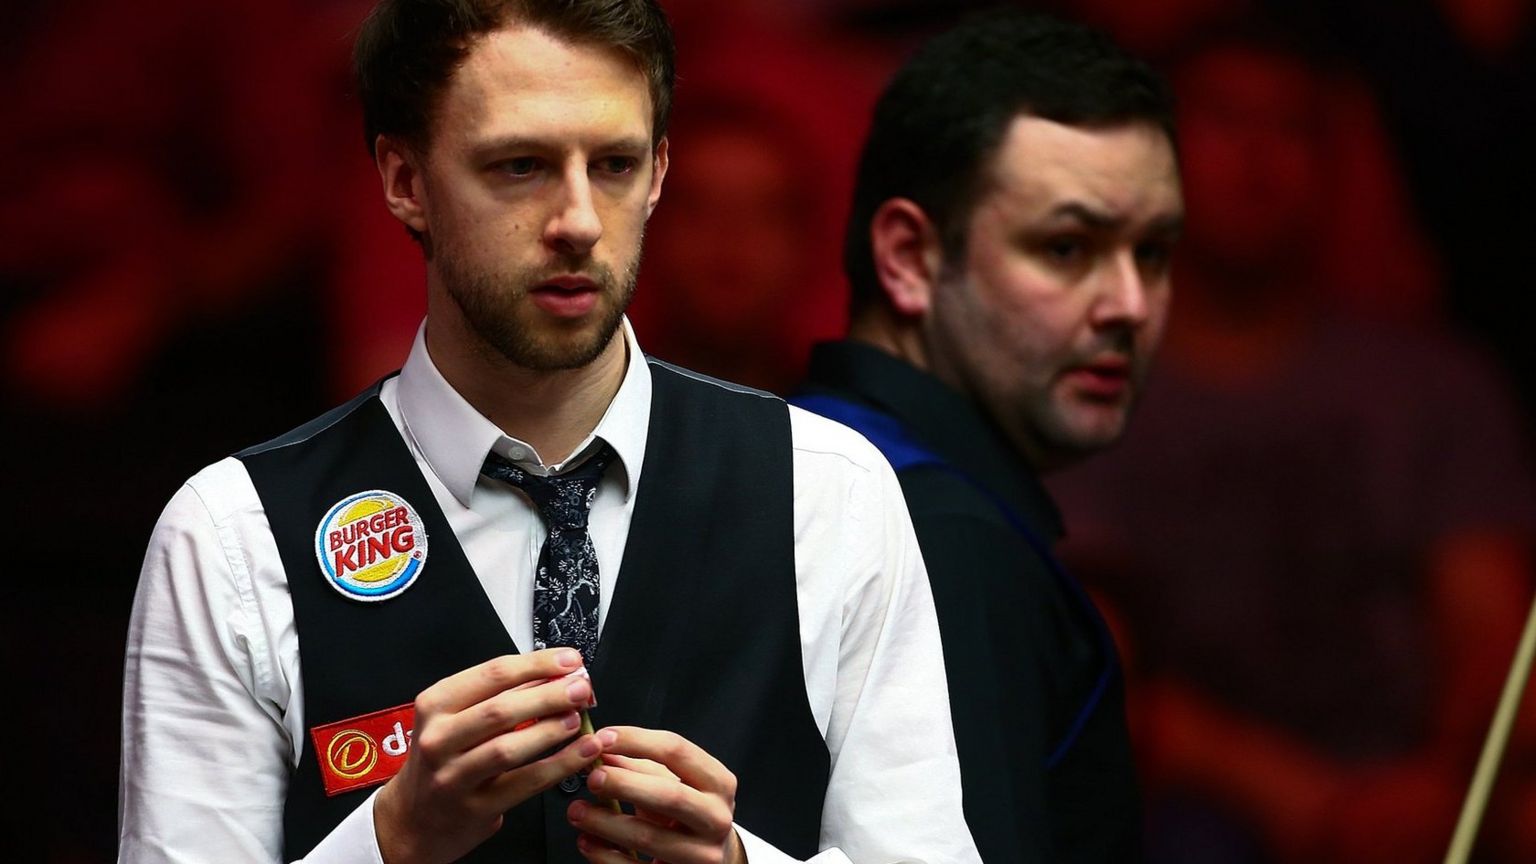 Judd Trump and Stephen Maguire